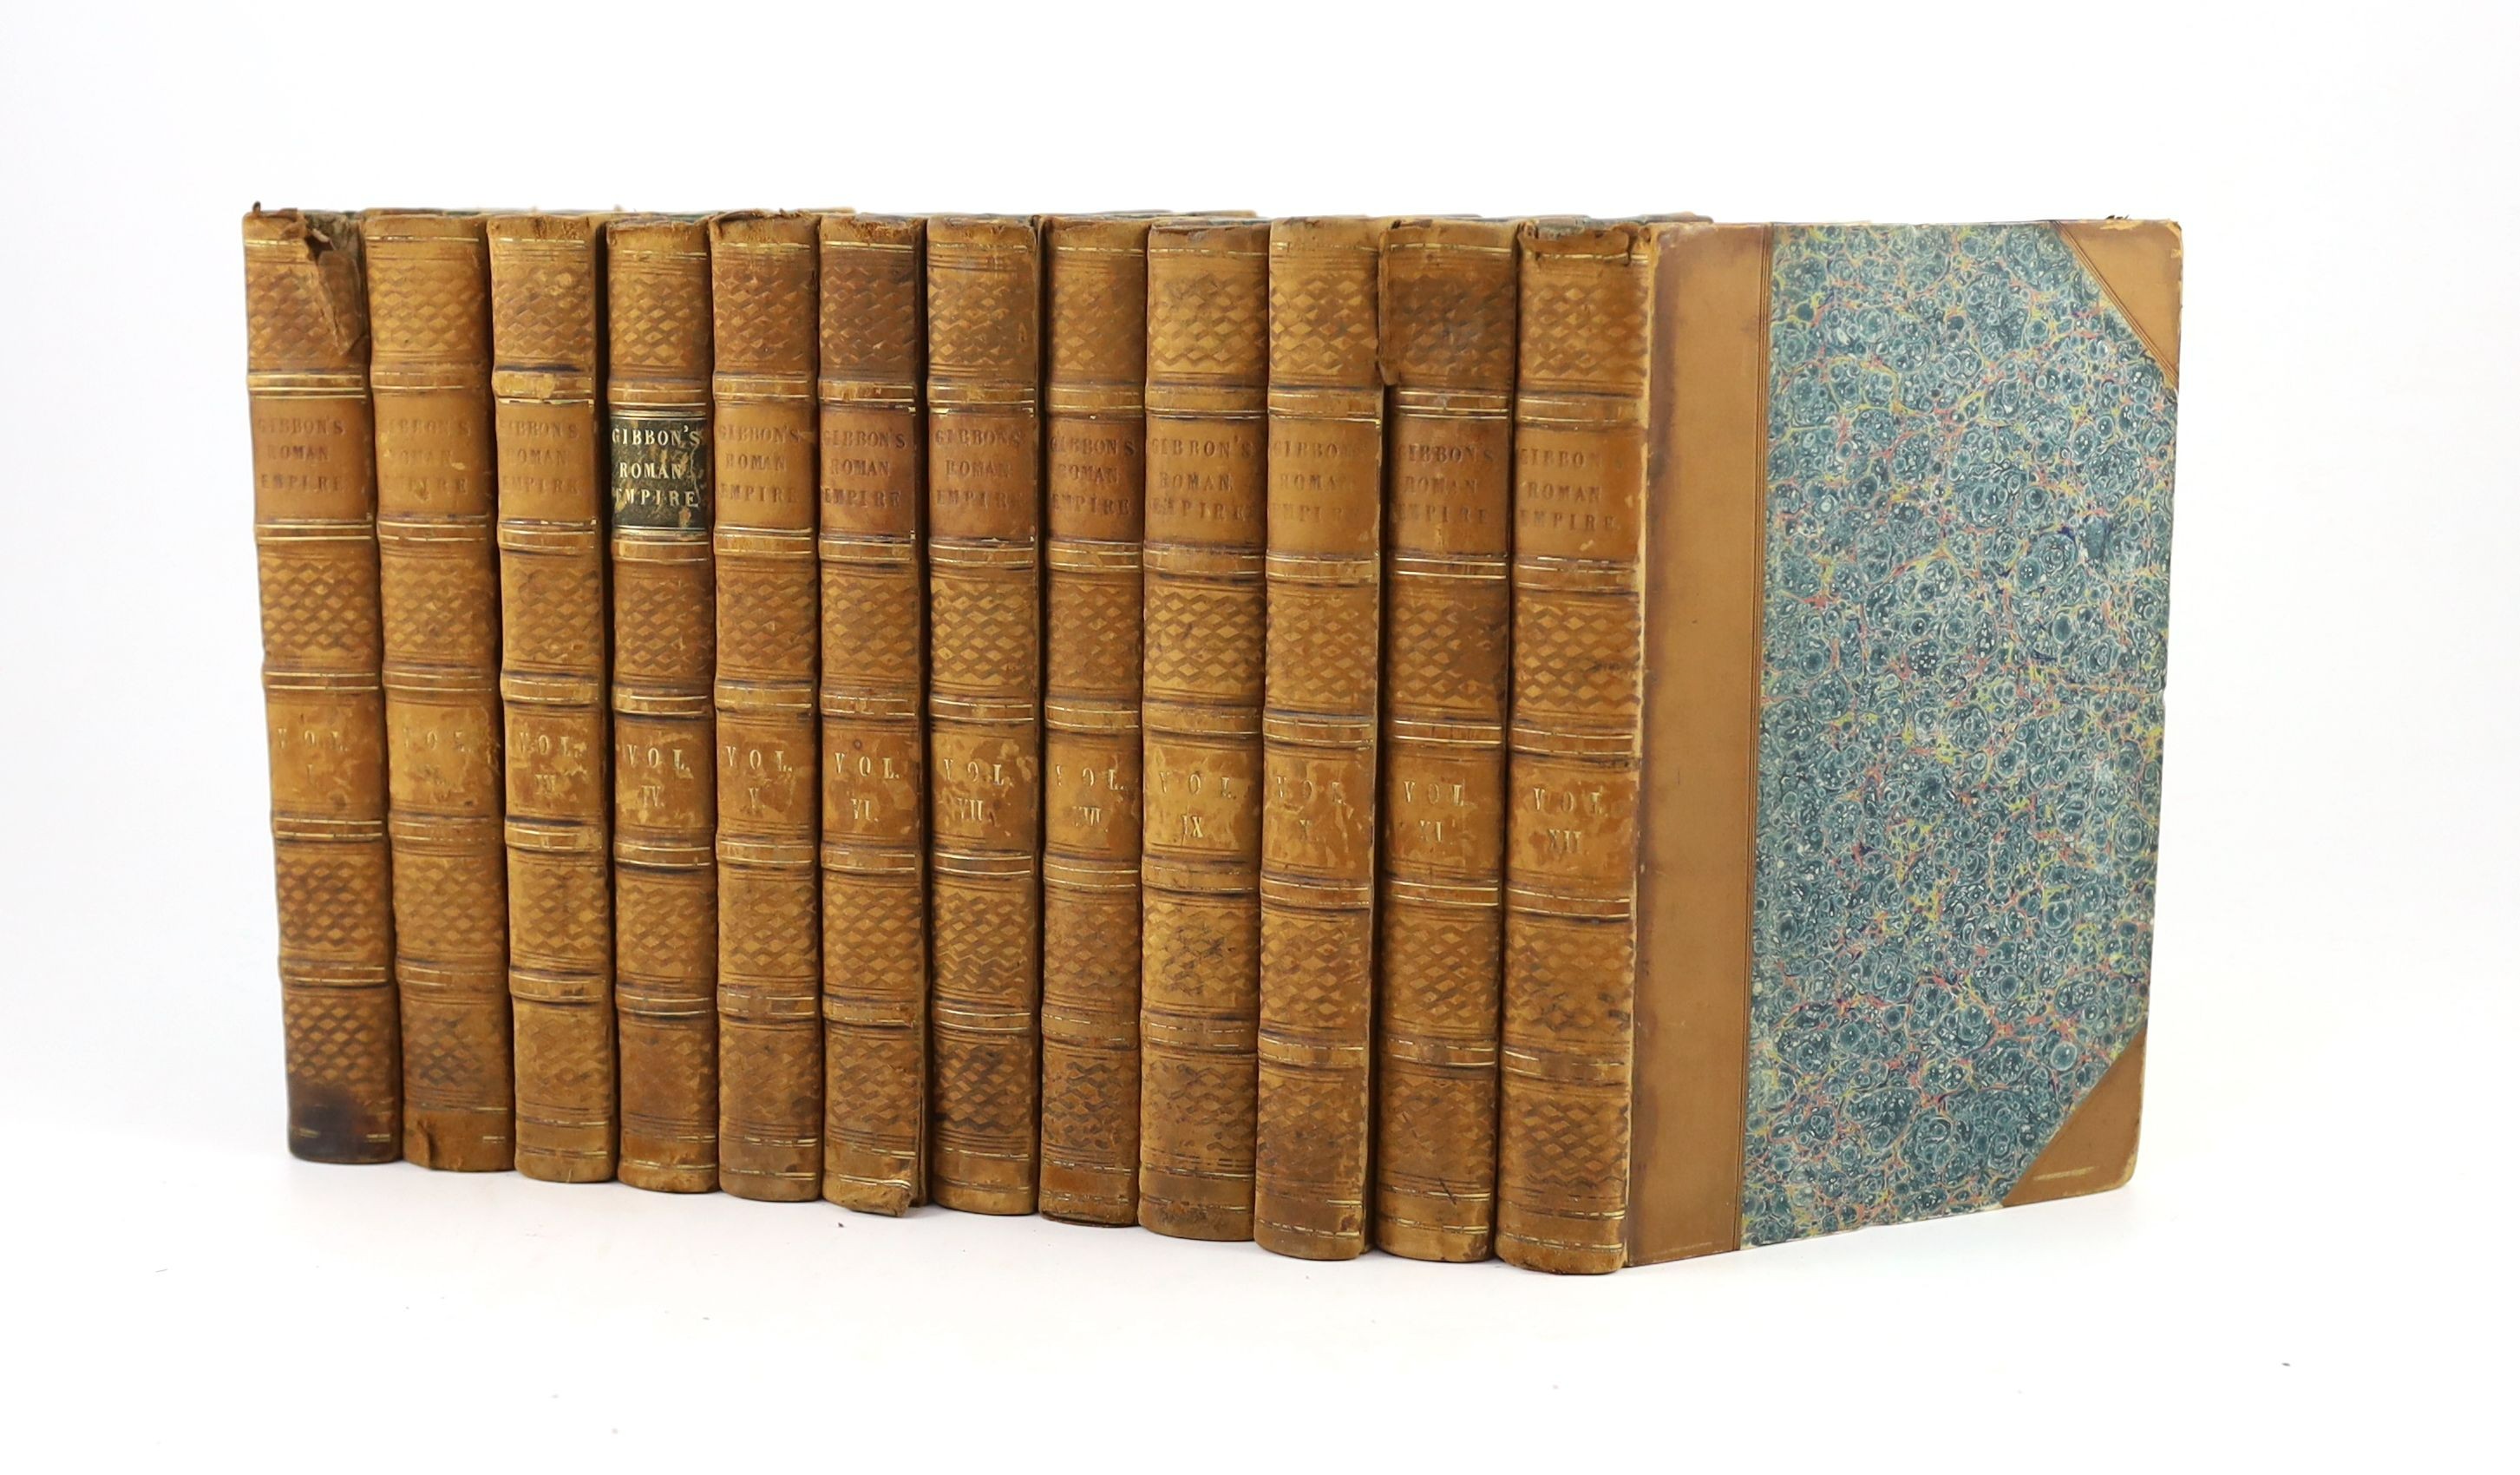 Gibbon, Edward - The History of the Decline and Fall of the Roman Empire, 12 vols, 8vo, half calf, with portrait frontispiece and 2 folding maps, frontis and titles browned, maps spotted, lacking most titling labels, Lon